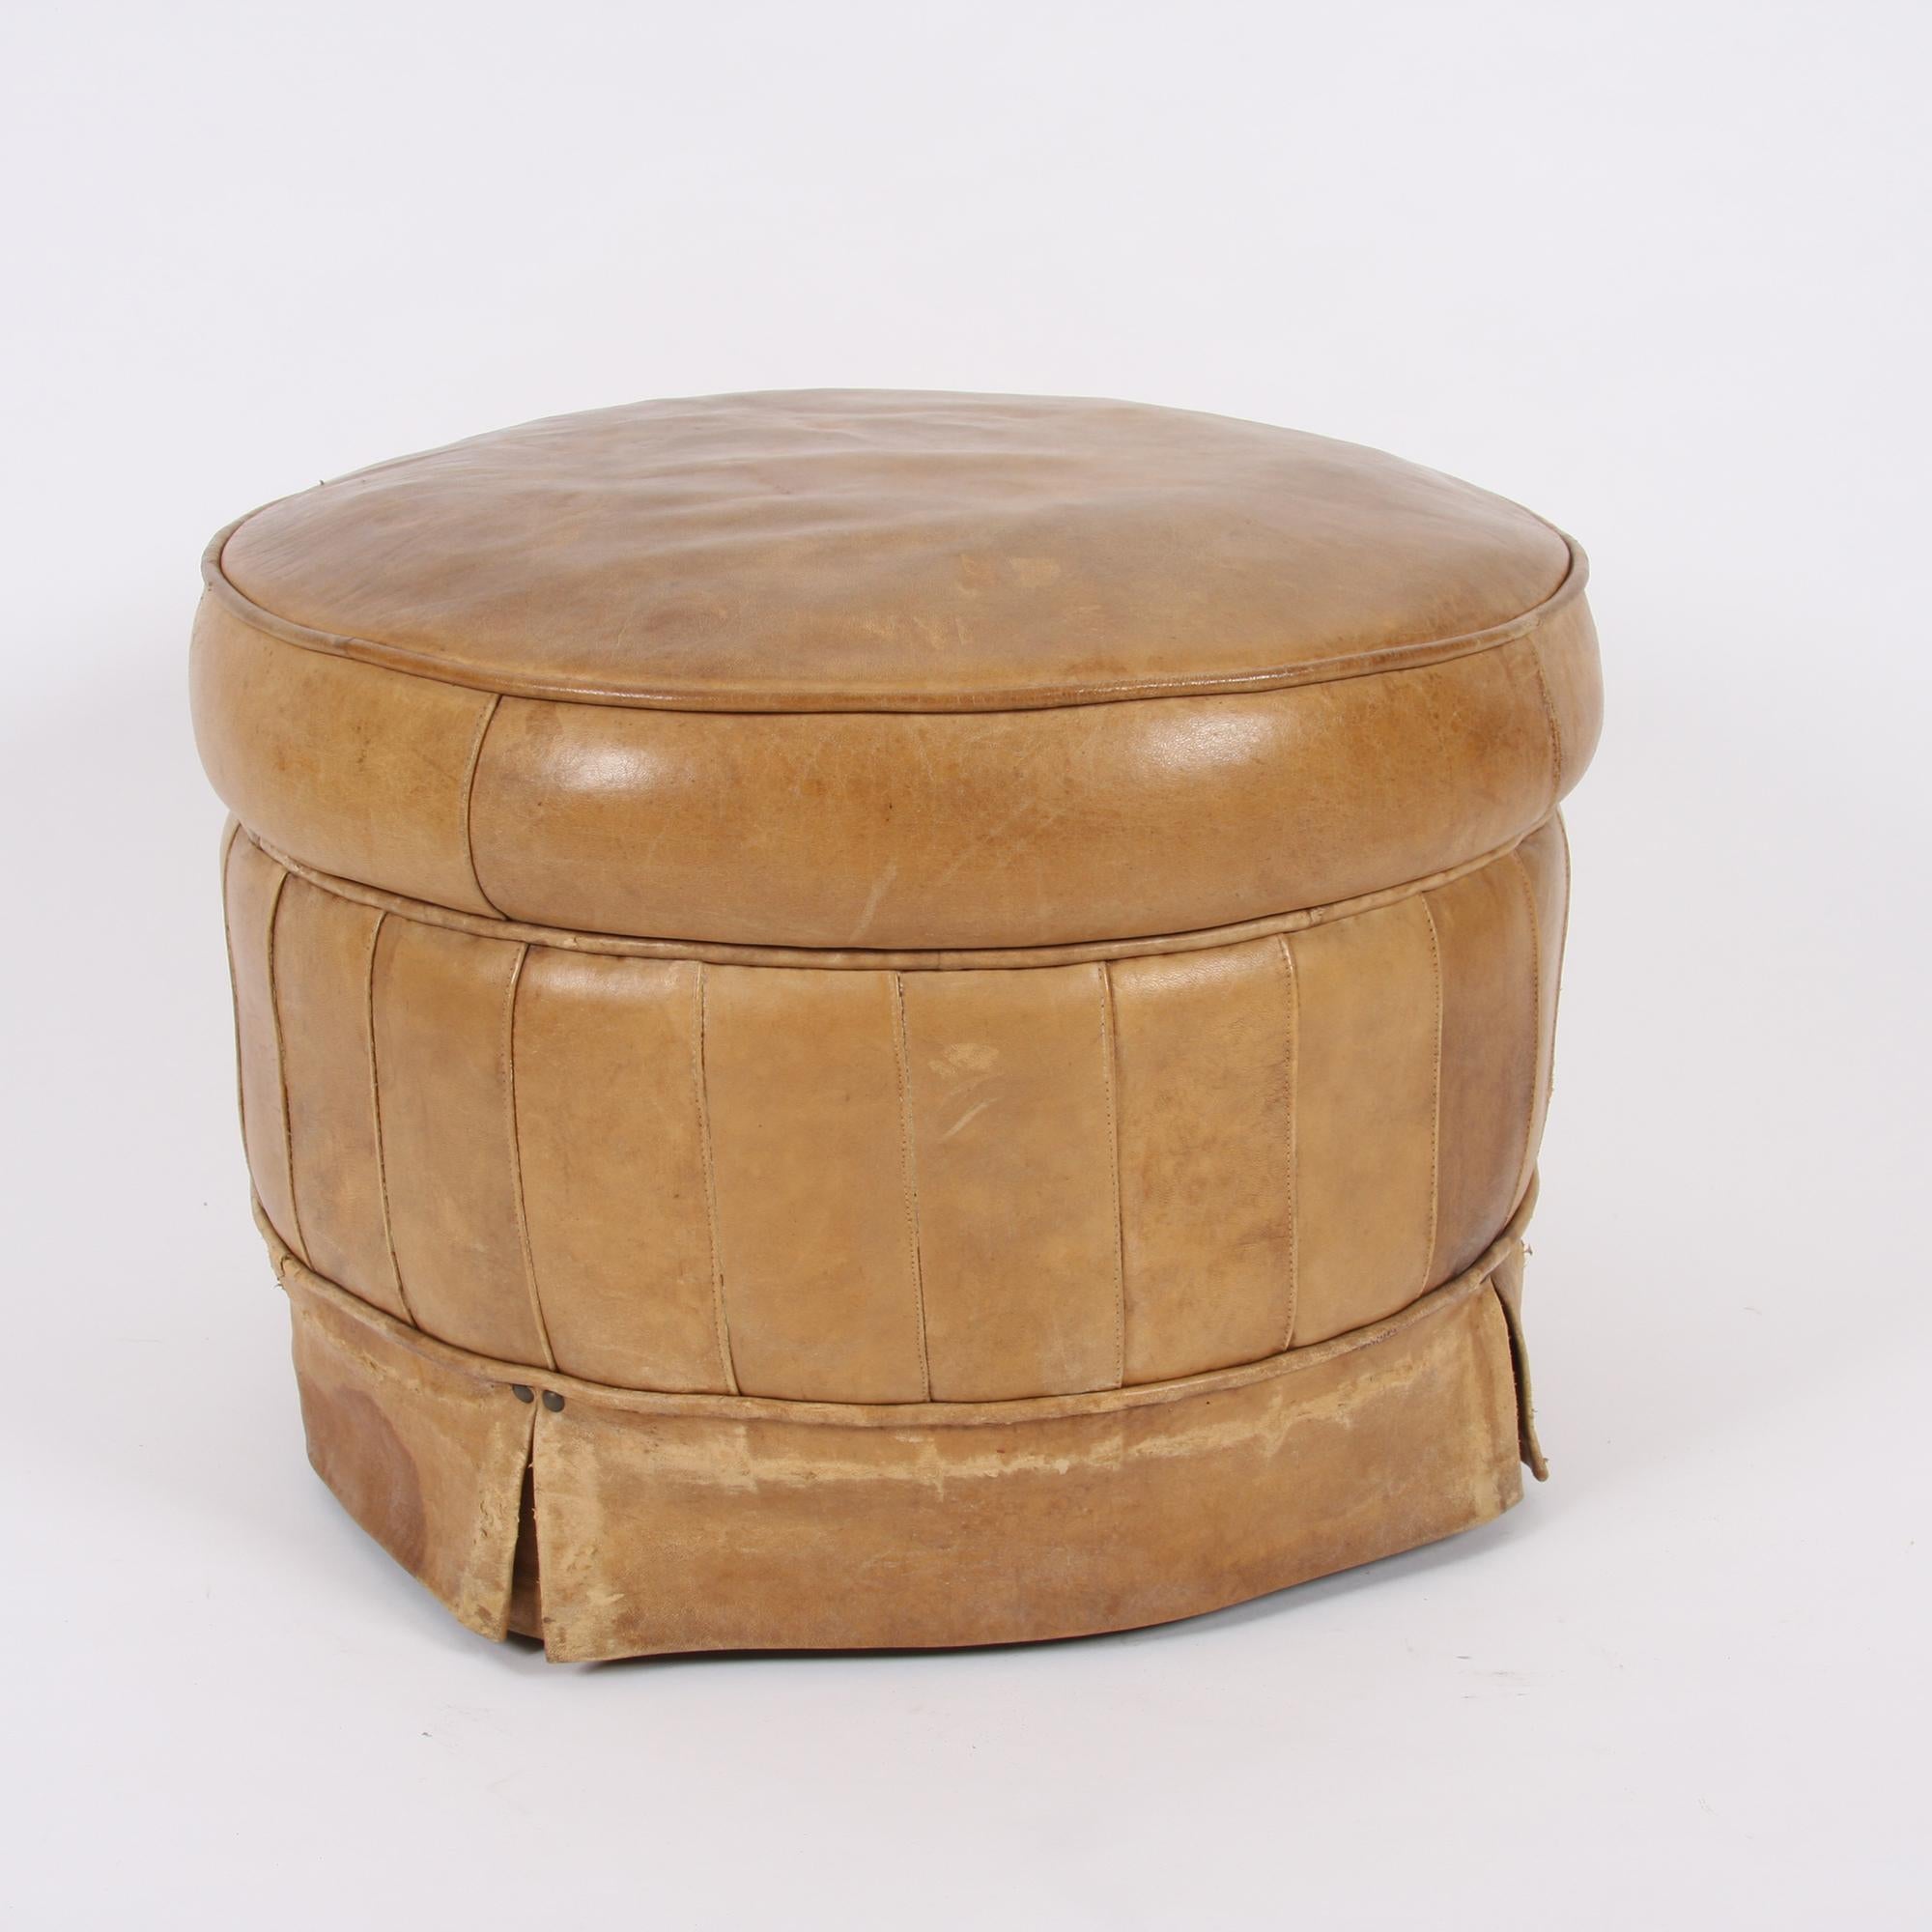 This handsome stool, with lovely worn leather and original horsehair upholstery, dates back to 1950s England.